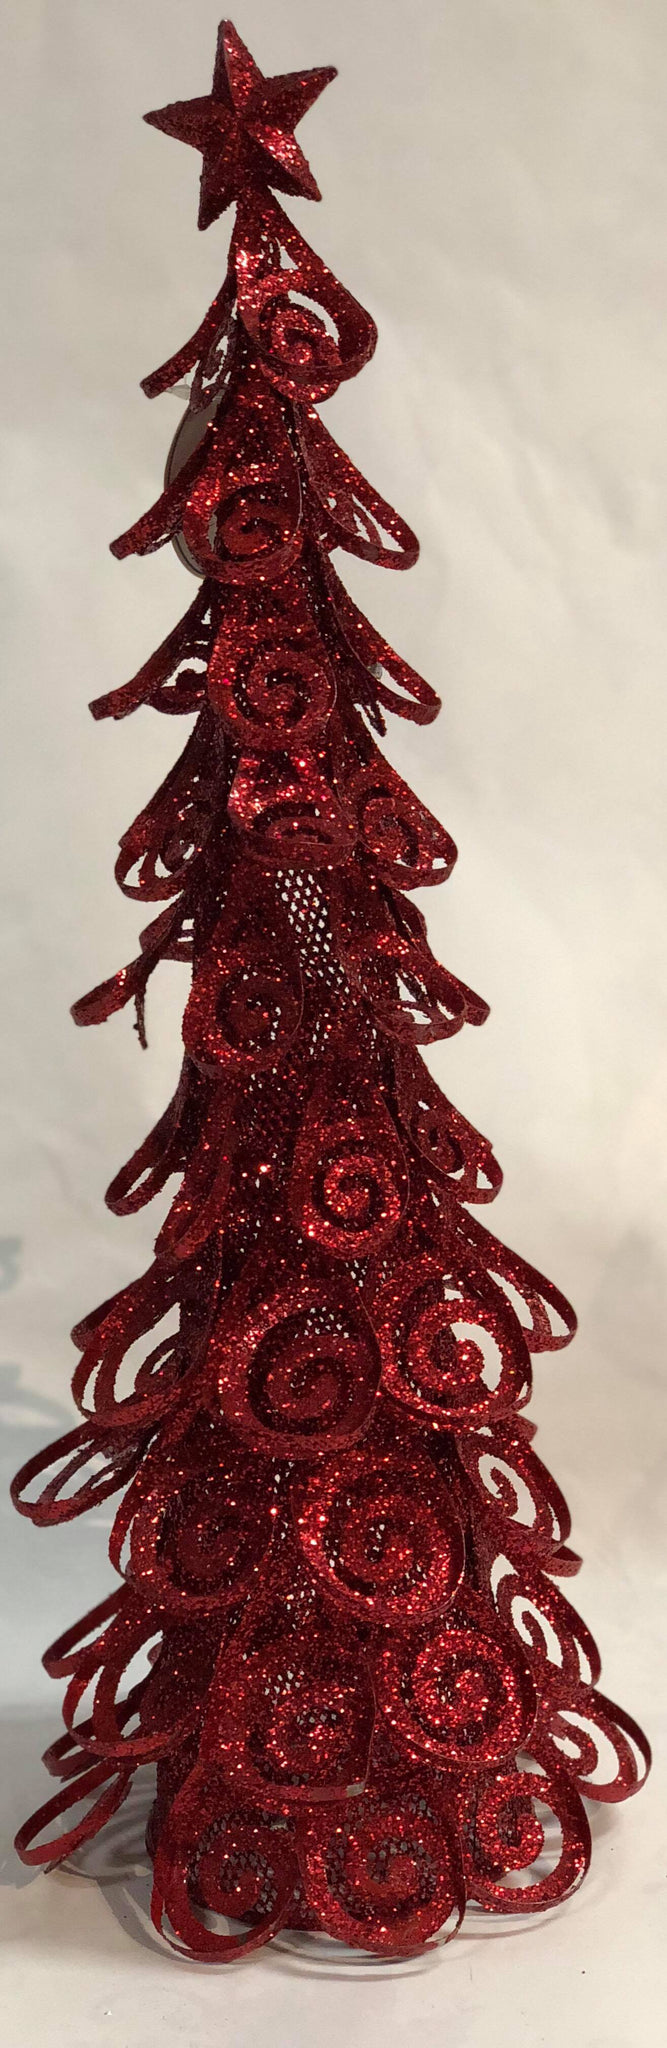 Red metal tree with star